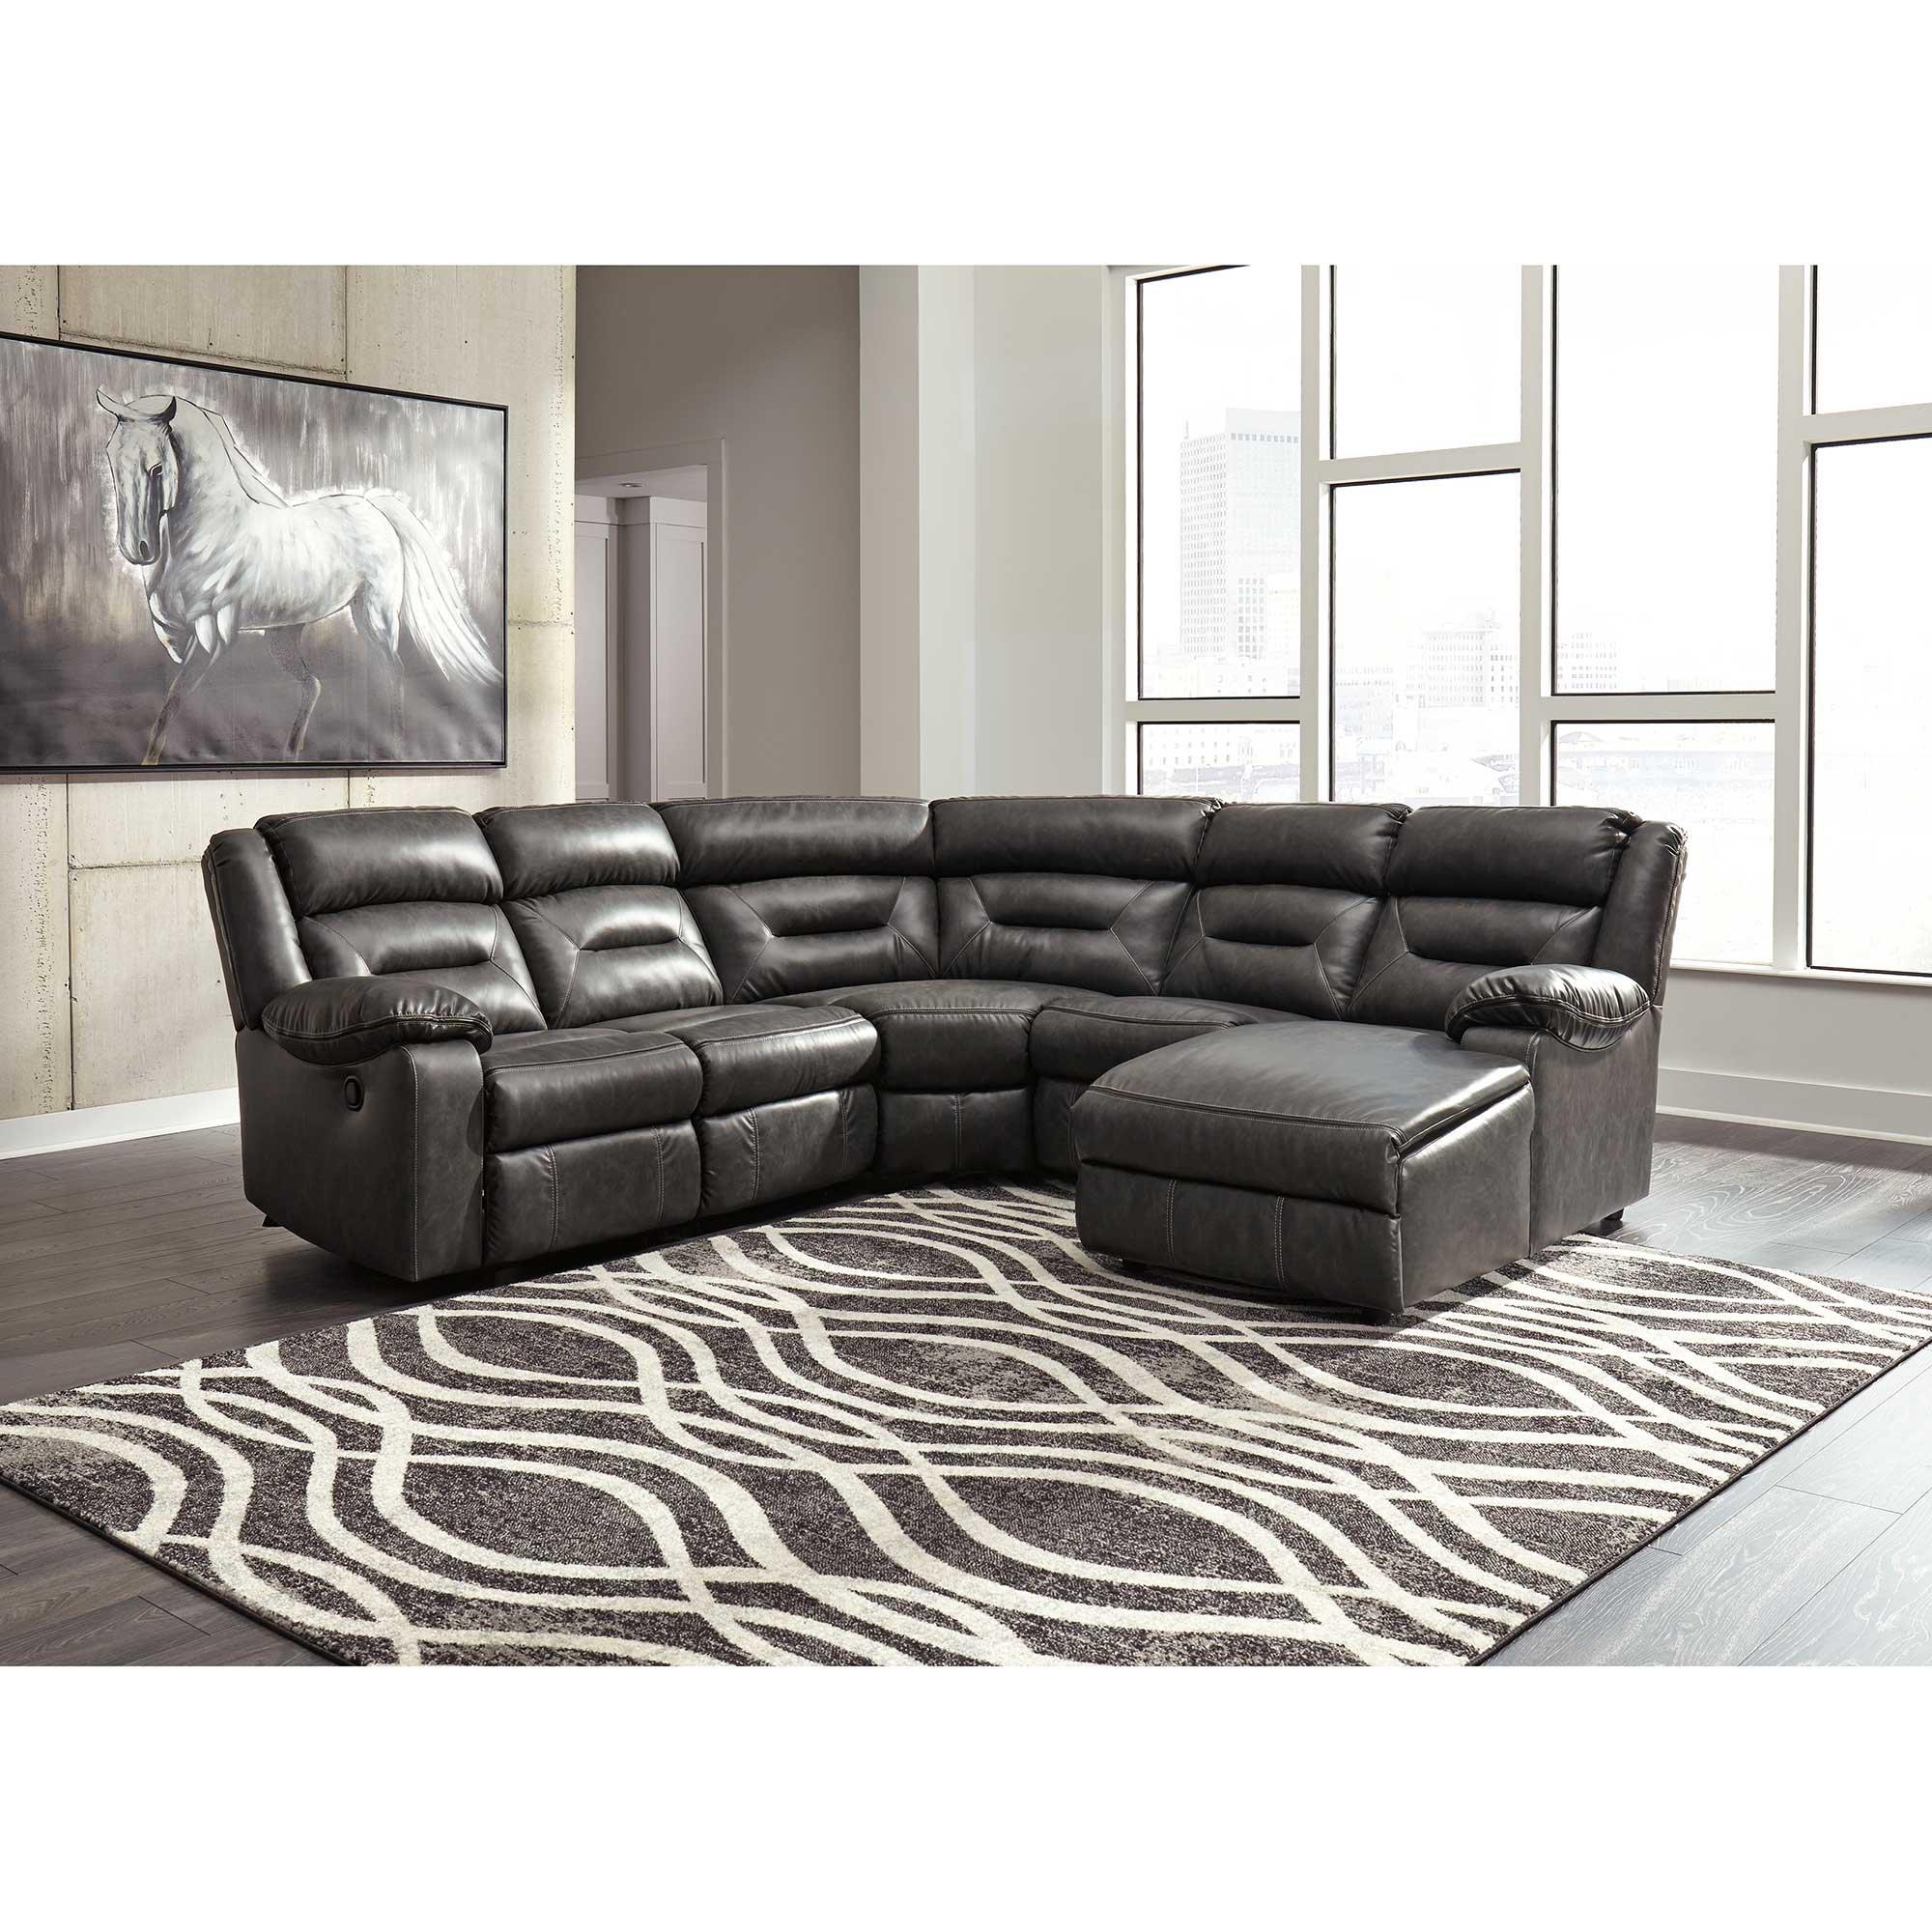 Ashley Furniture 5 Piece Living Room Set / Shop online or find a nearby ...